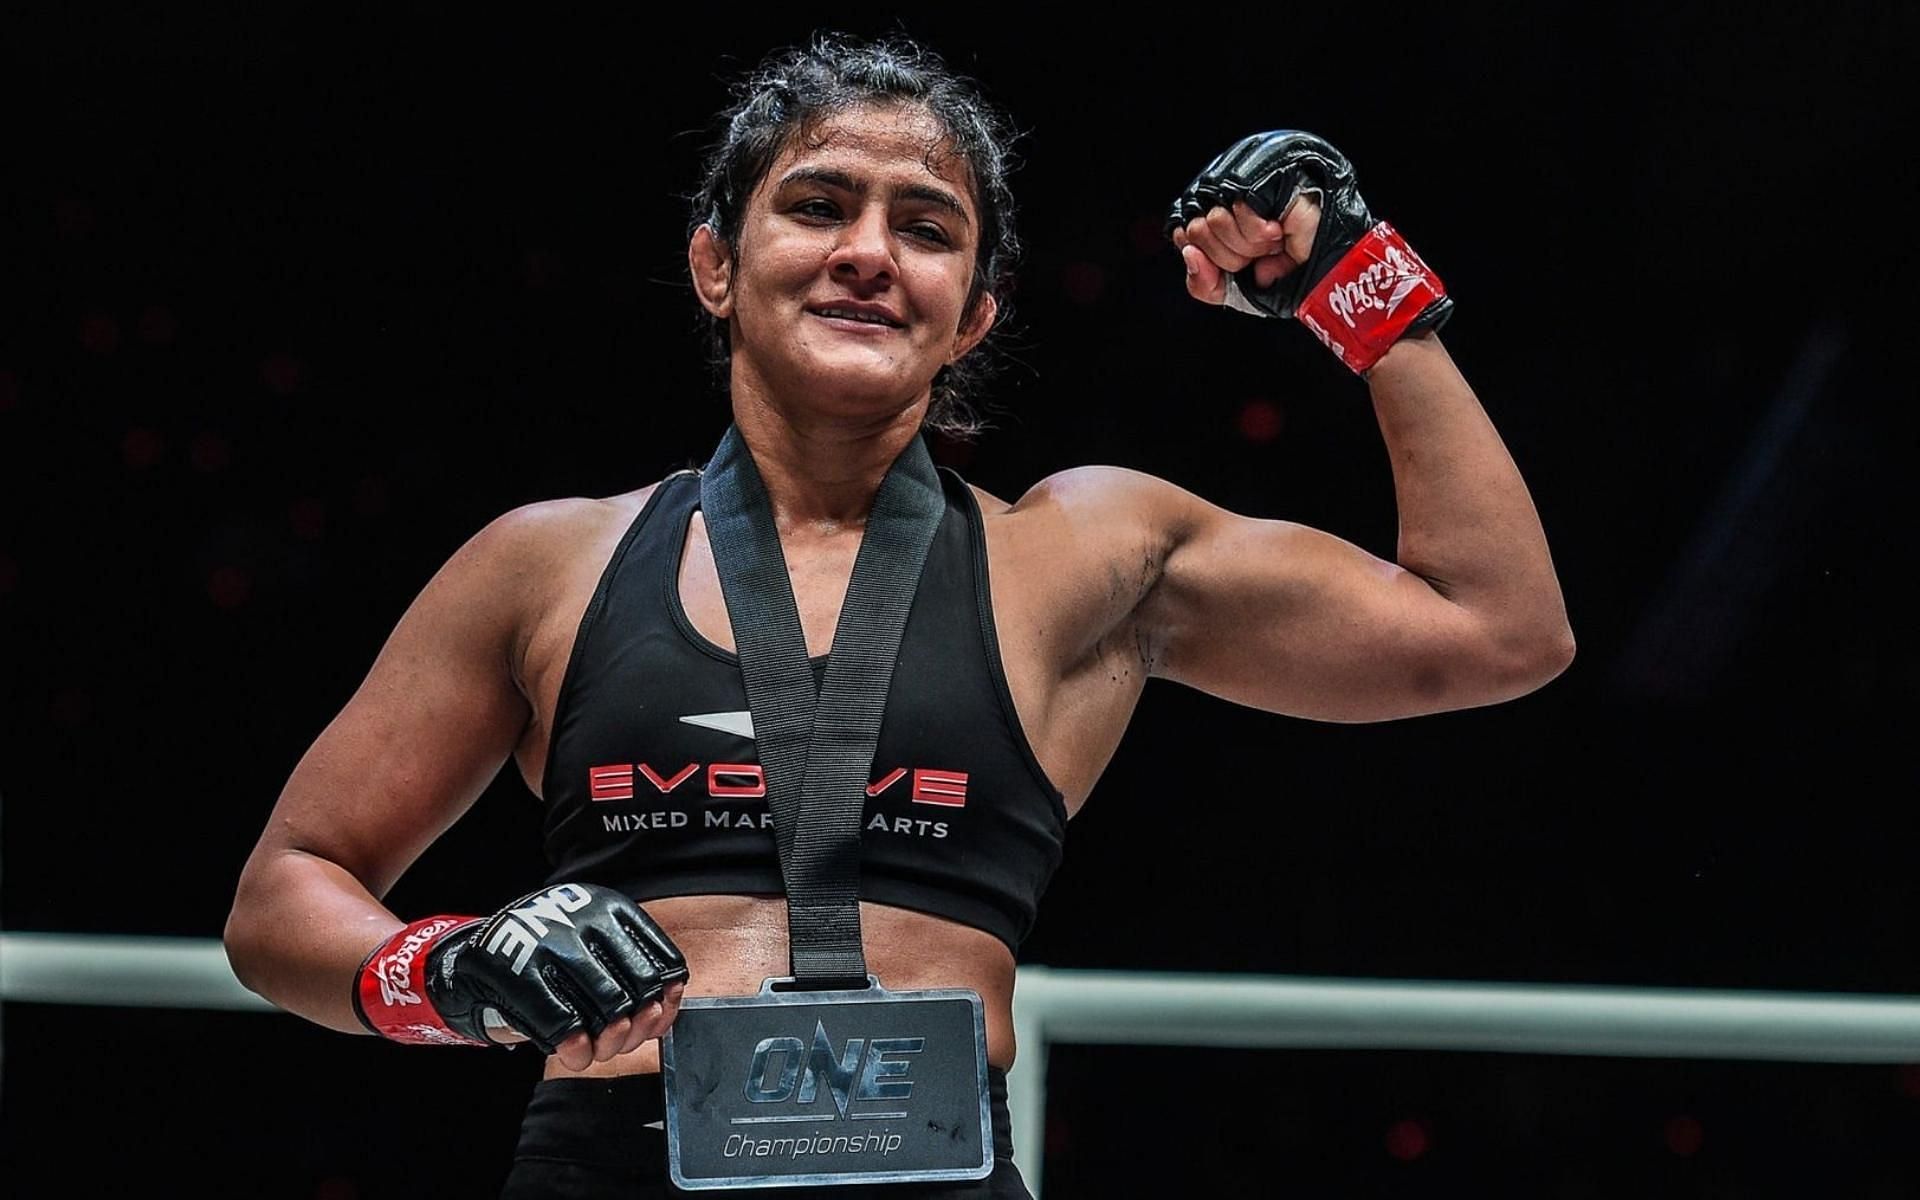 Ritu Phogat is gearing up for a return in the ONE Championship Circle. (Image courtesy of ONE Championship)